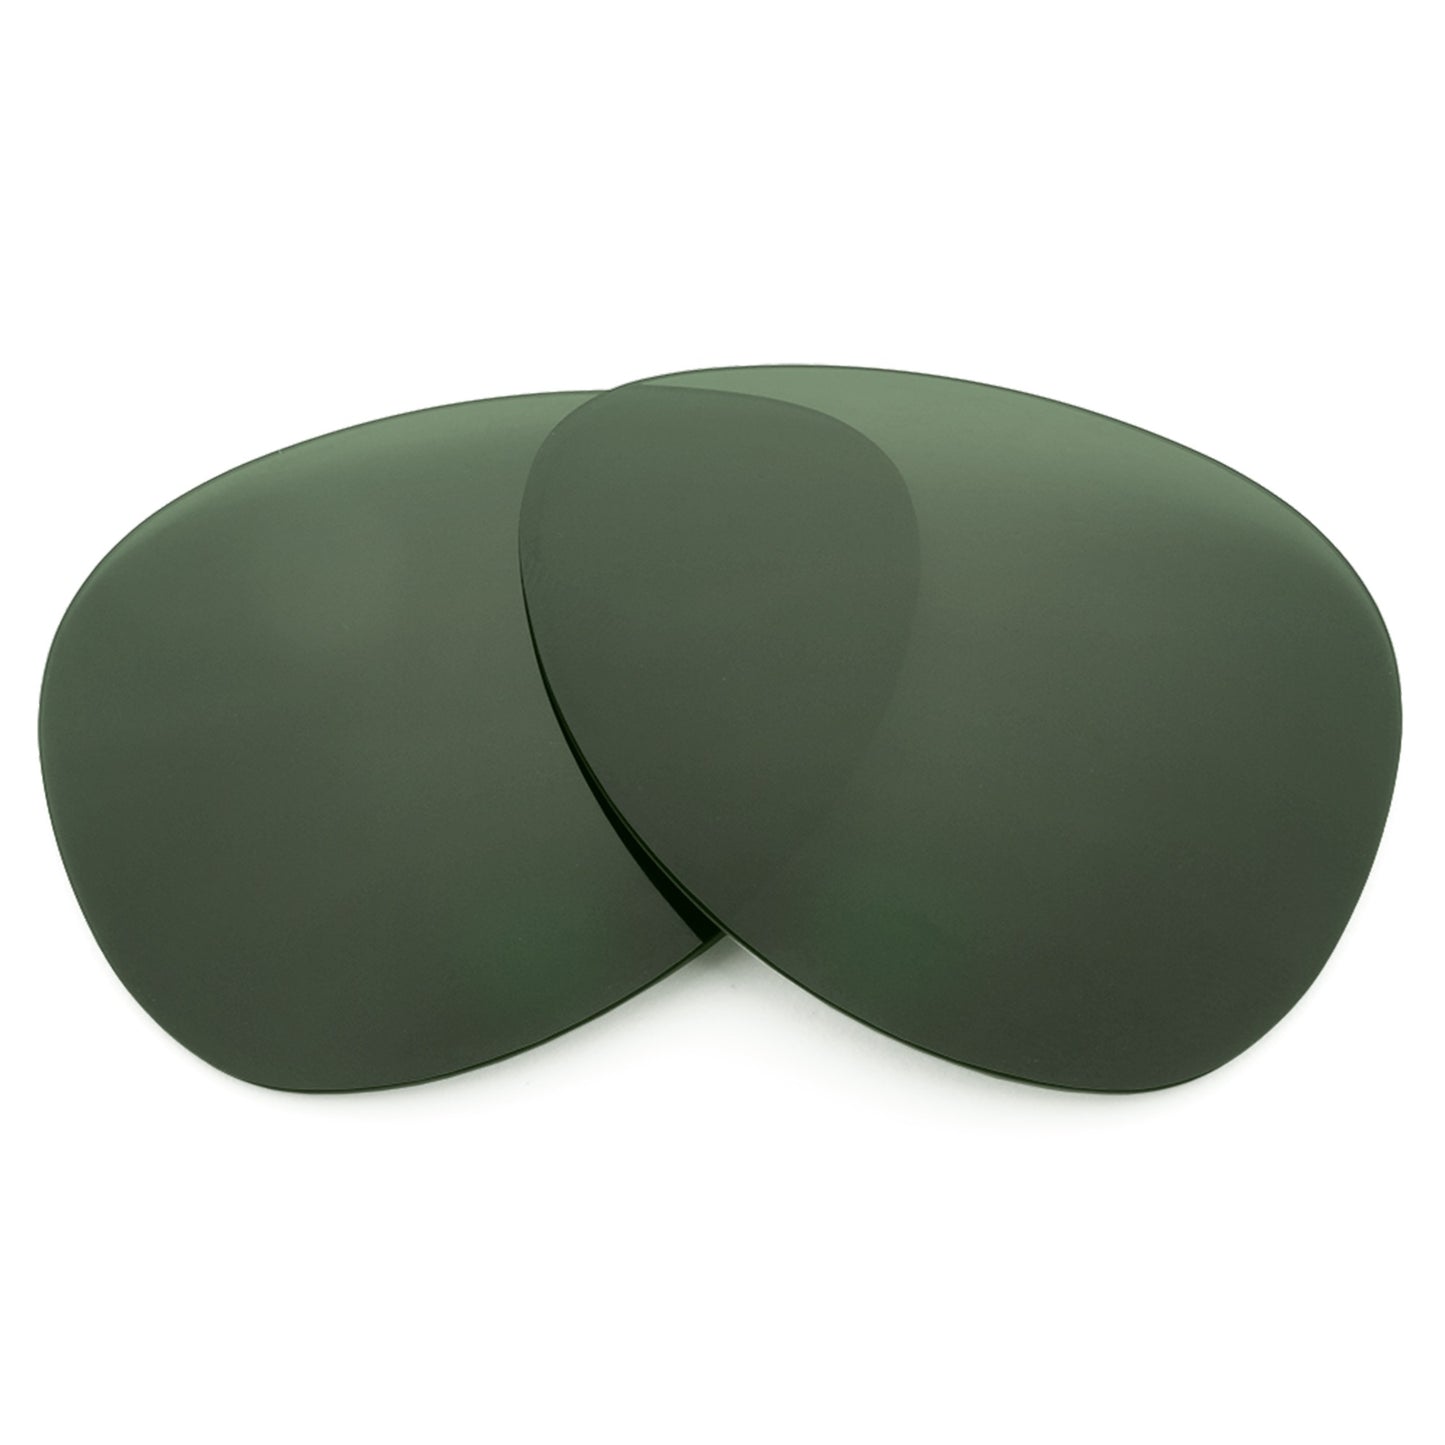 Revant replacement lenses for Ray-Ban Outdoorsman II Rainbow RB3407 58mm Non-Polarized Gray Green